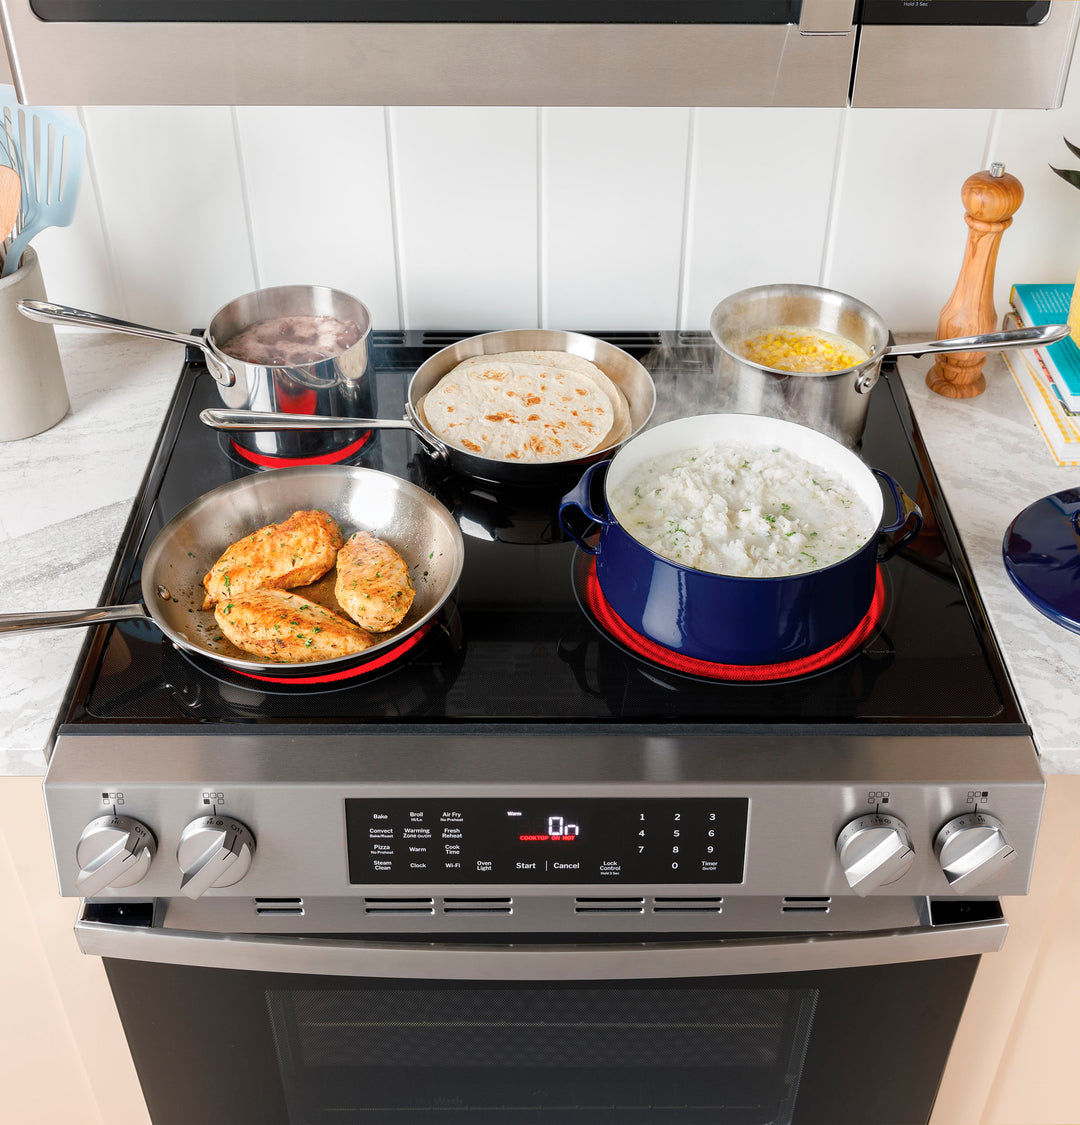 GE - 5.3 Cu. Ft. Slide-In Electric Range with Self-Clean and Steam Cleaning Option and Crisp Mode - Stainless Steel_7